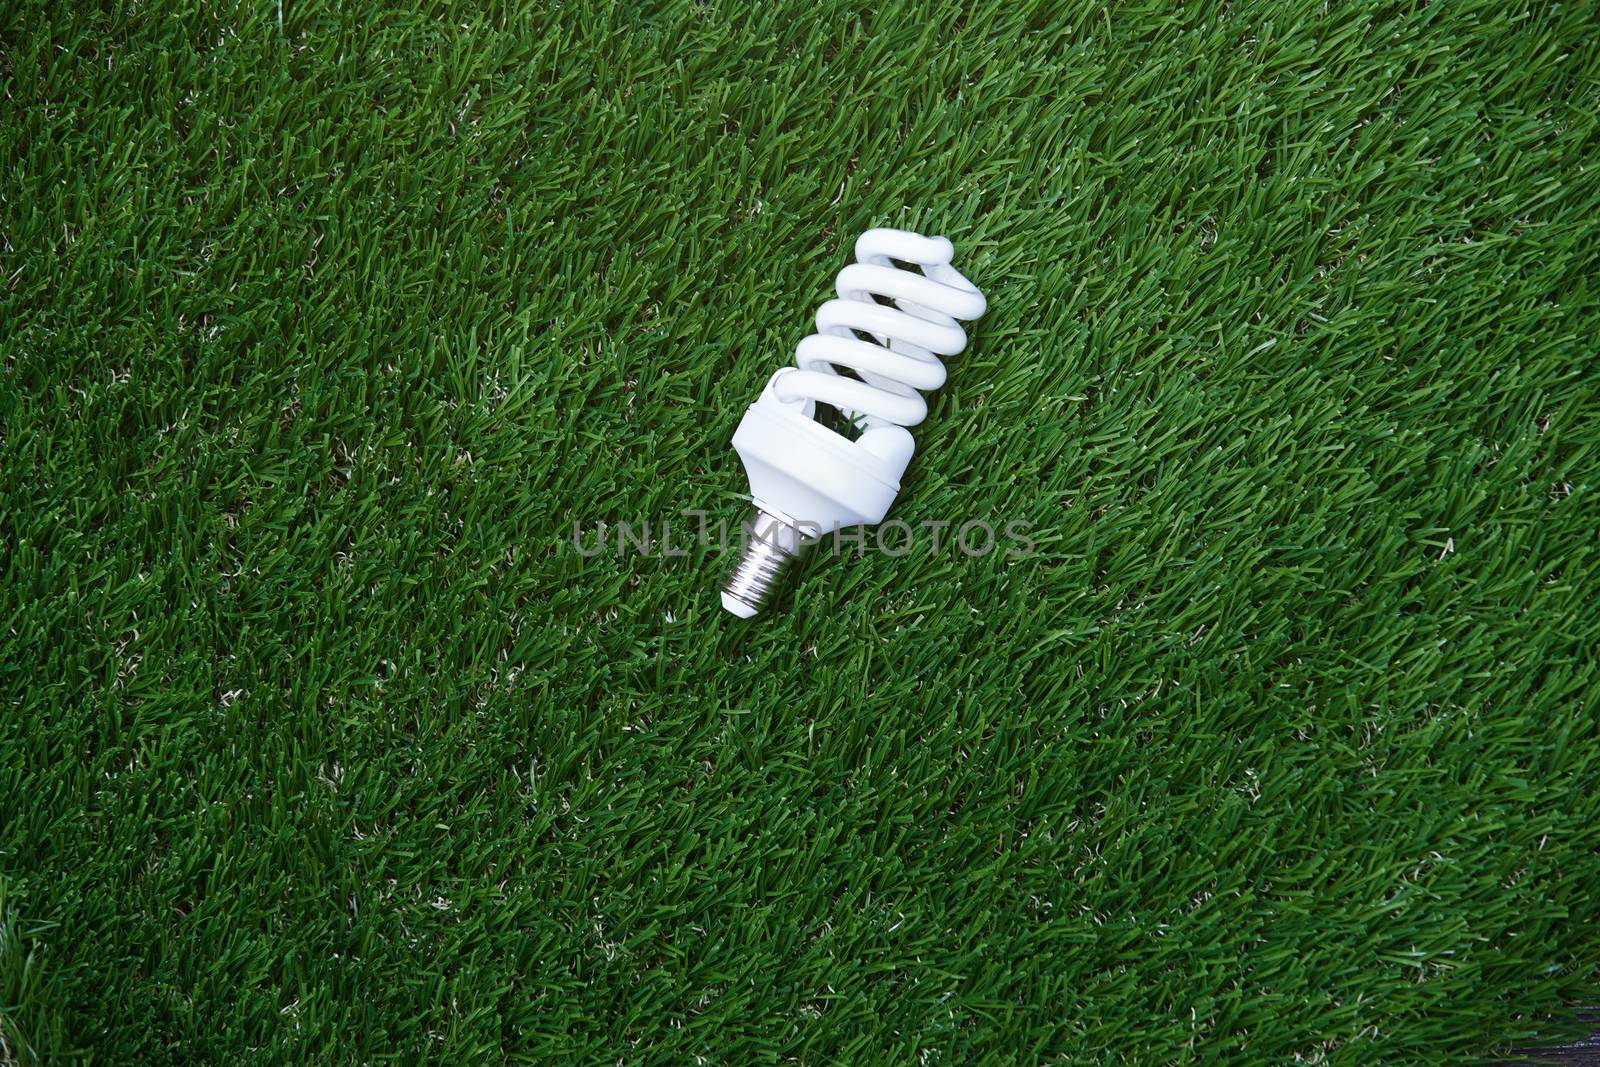 Energy saving bulb in the grass by Novic